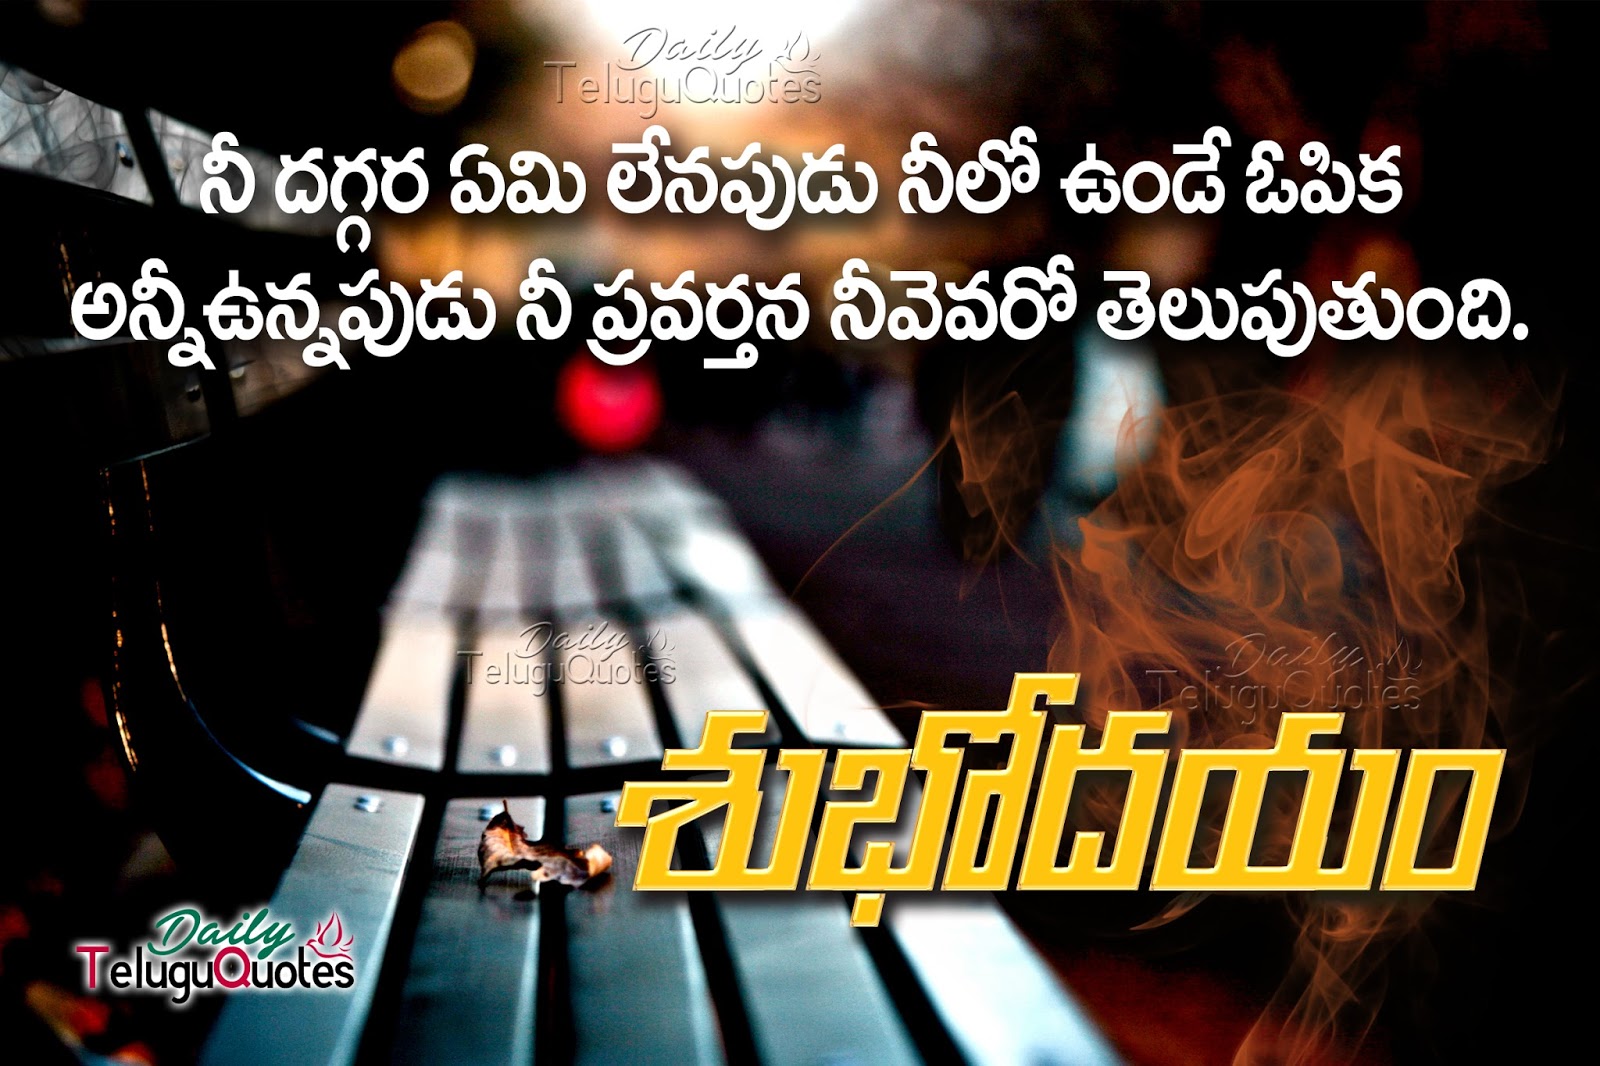 good morning telugu quotes and greetings about life